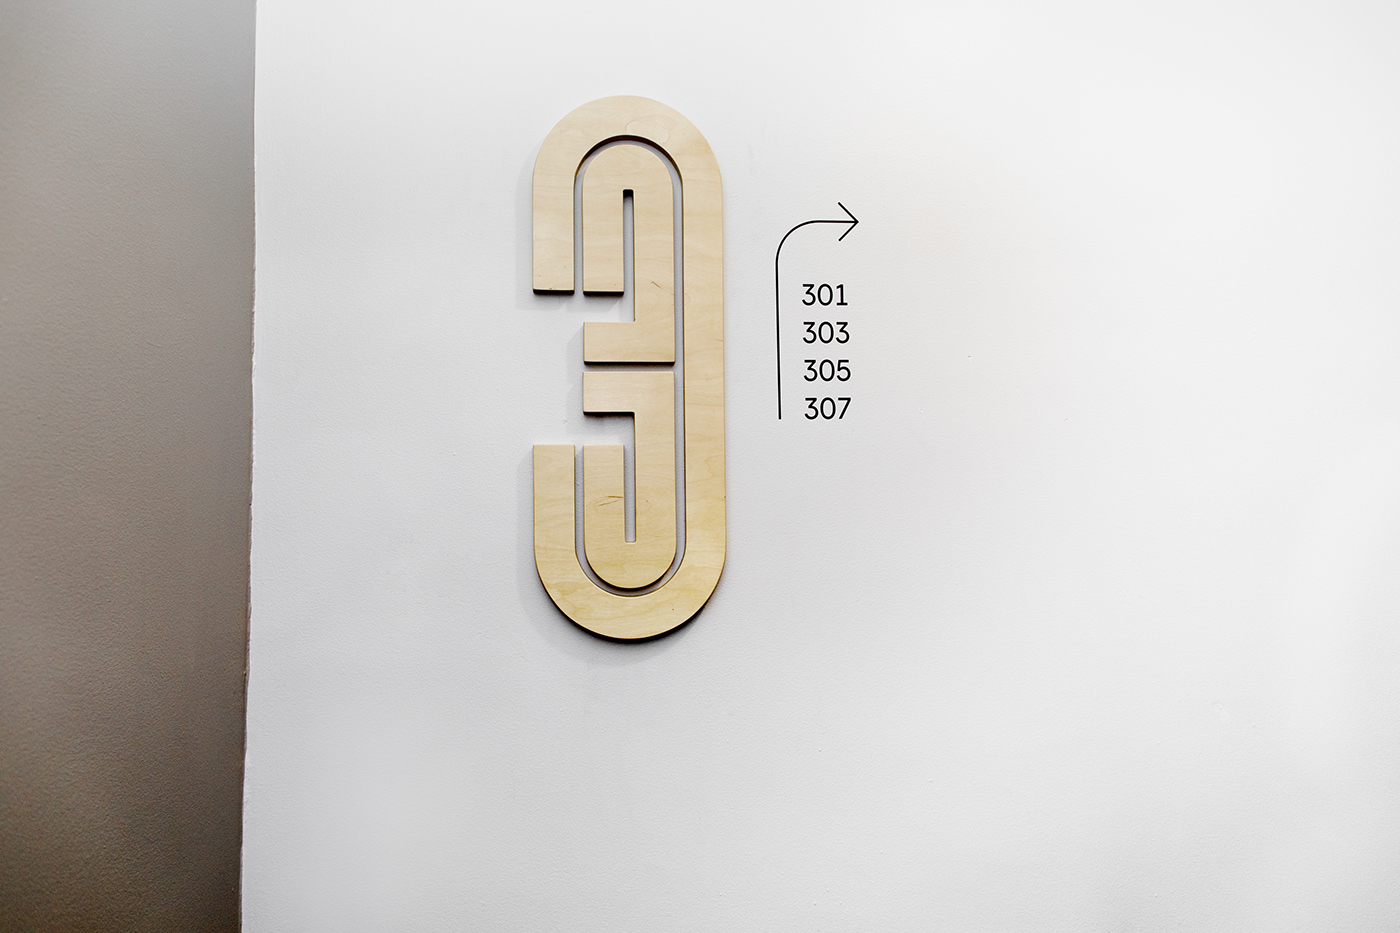 typography   Typographie lettrage lettering Signage signalétique Montreal Olympique olympic wood